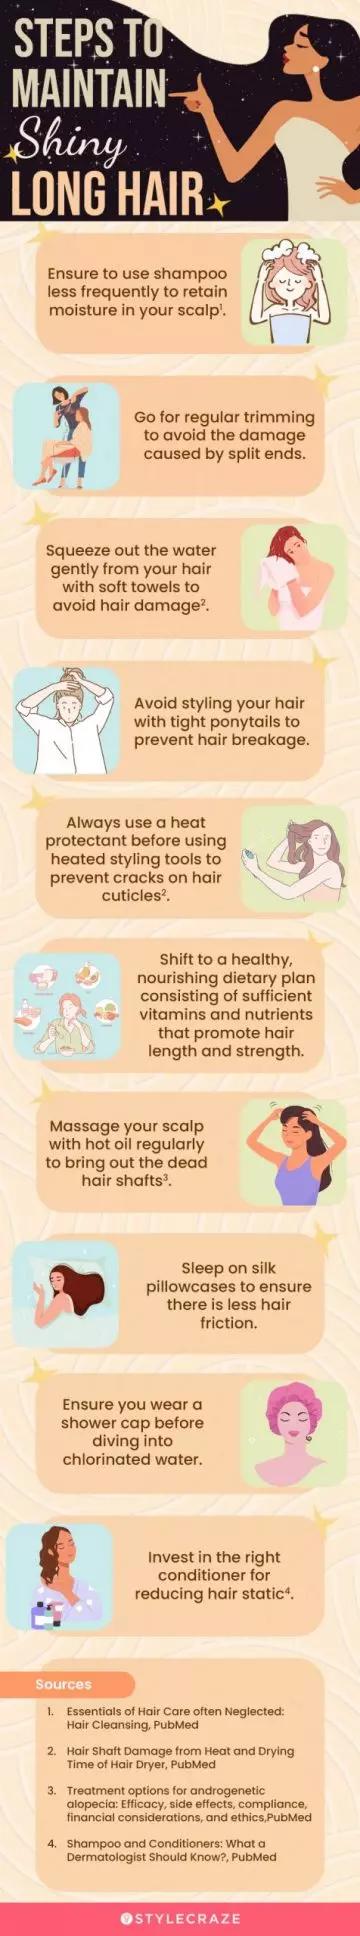 steps to maintain shiny long hair (infographic)